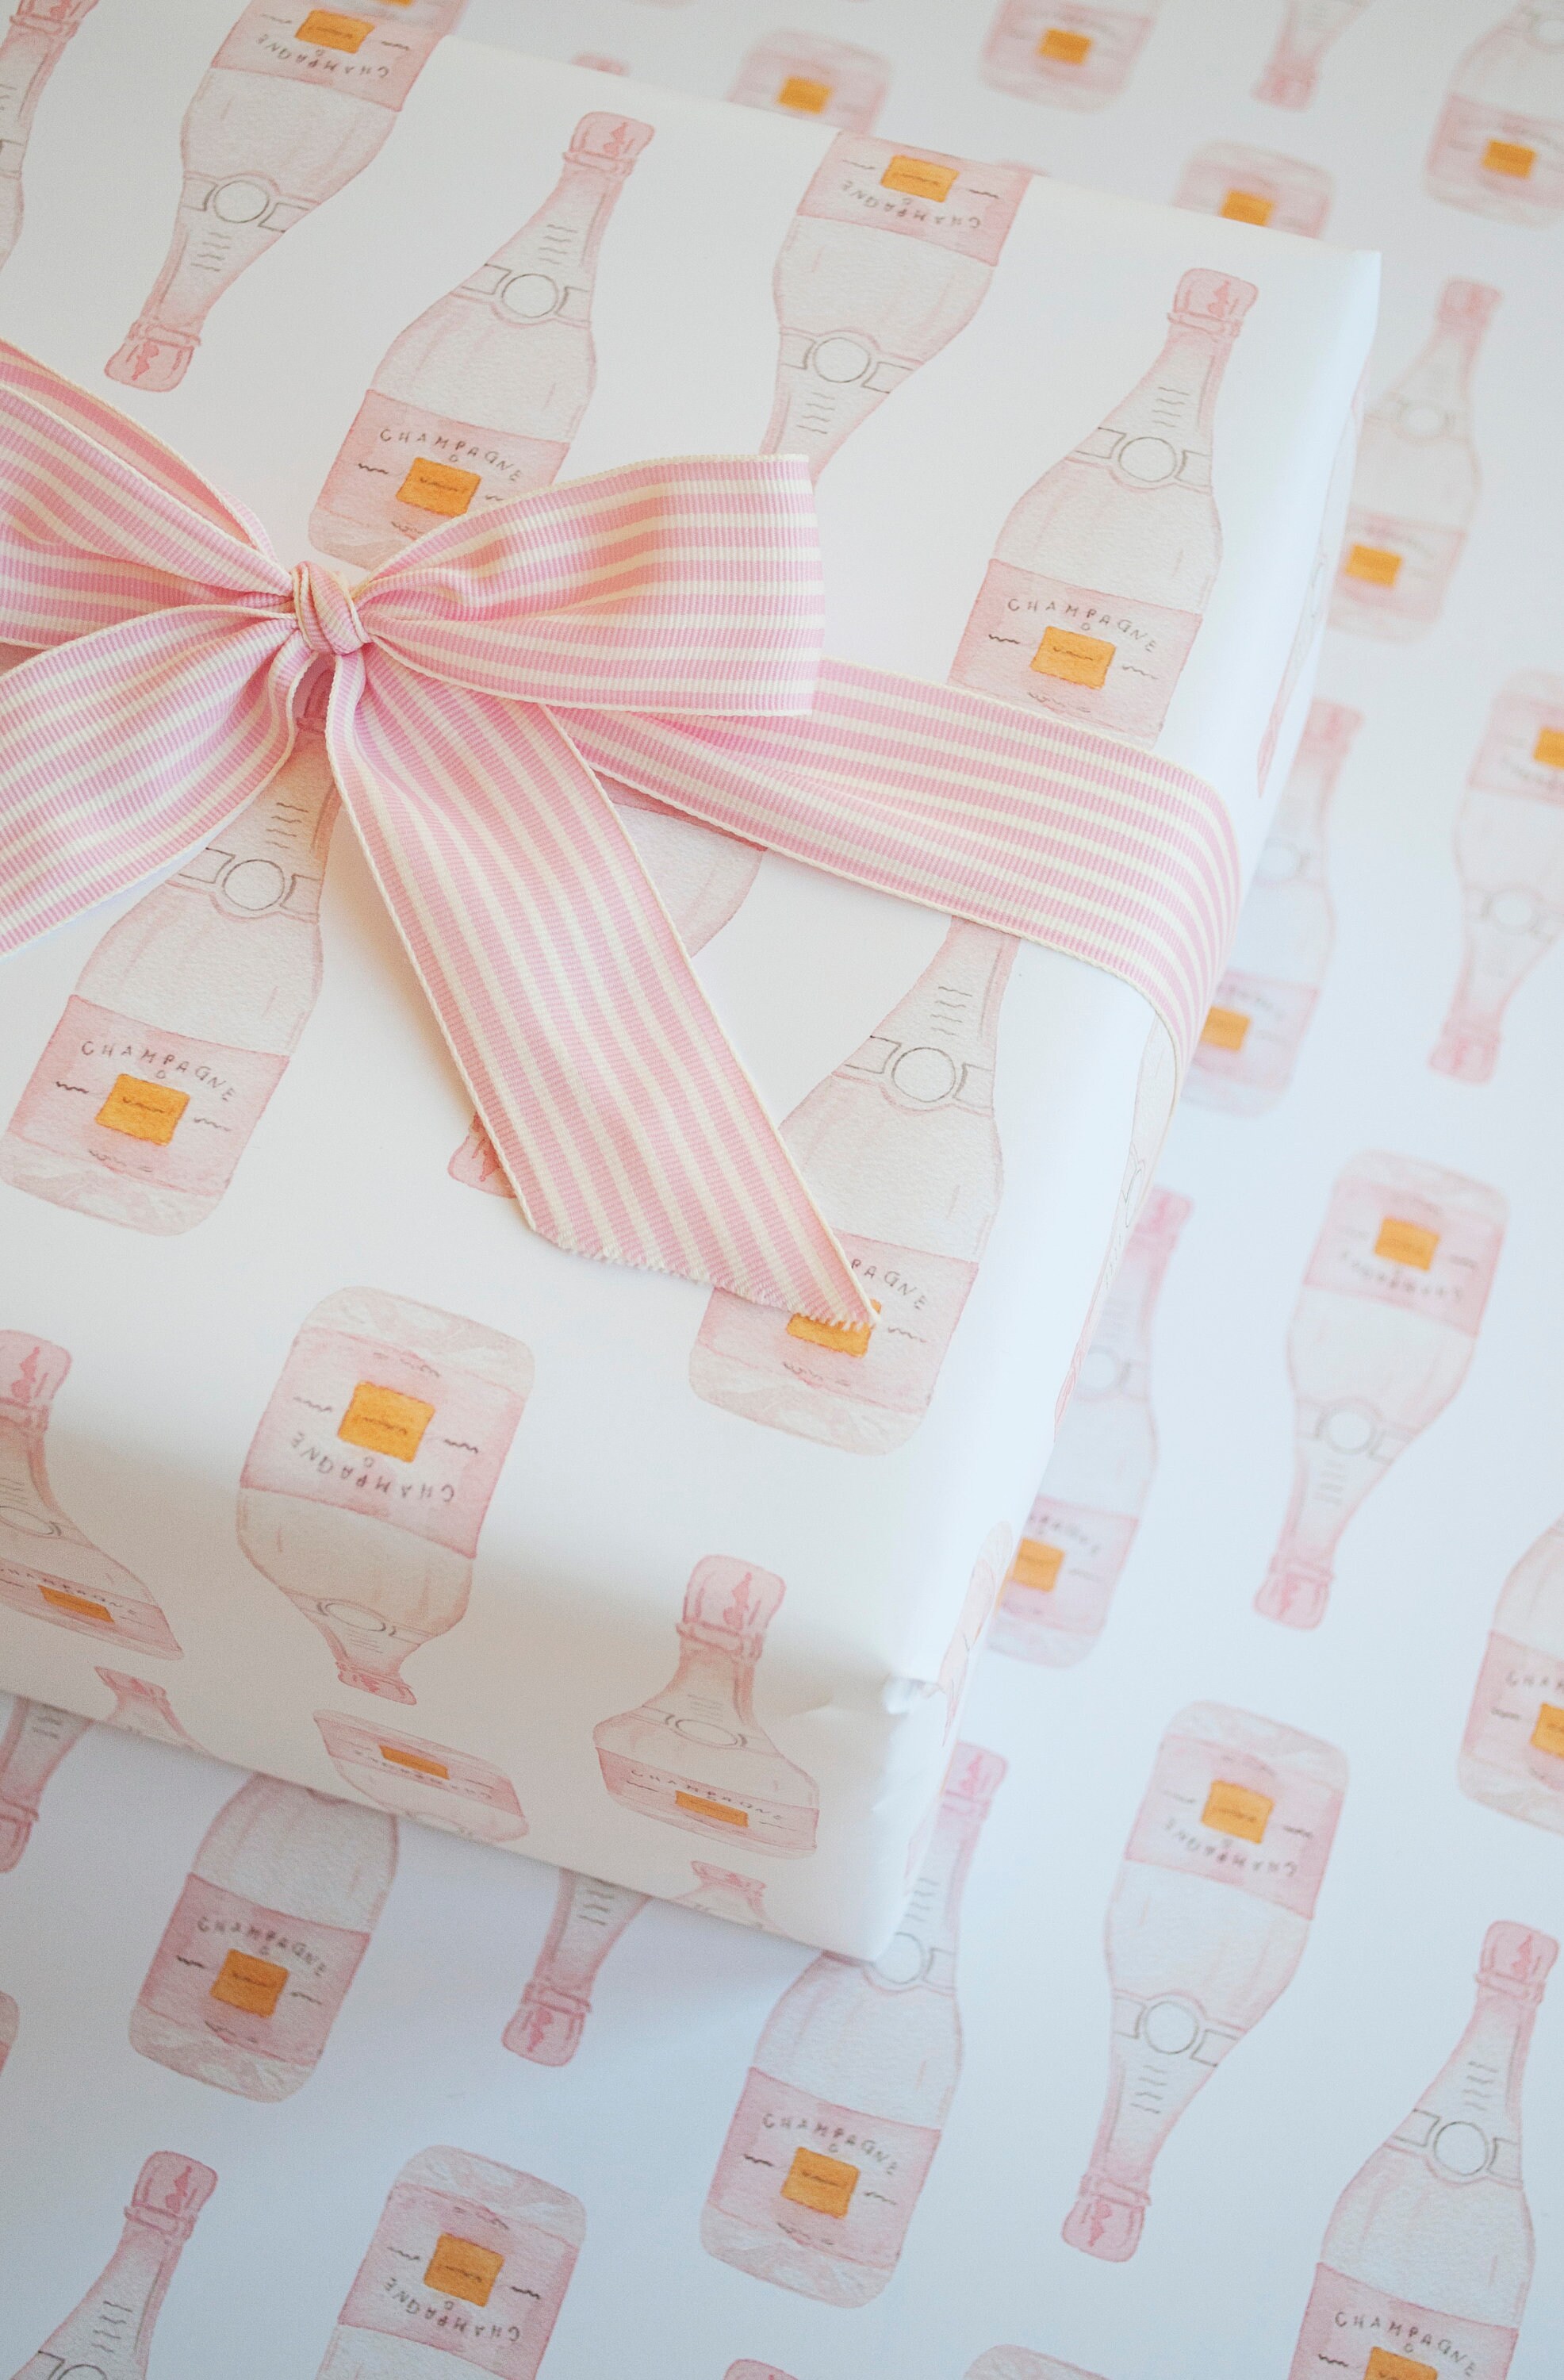 Ros Champagne Gift Wrap, Summer Champagne Wrapping Paper, Watercolor Stationery